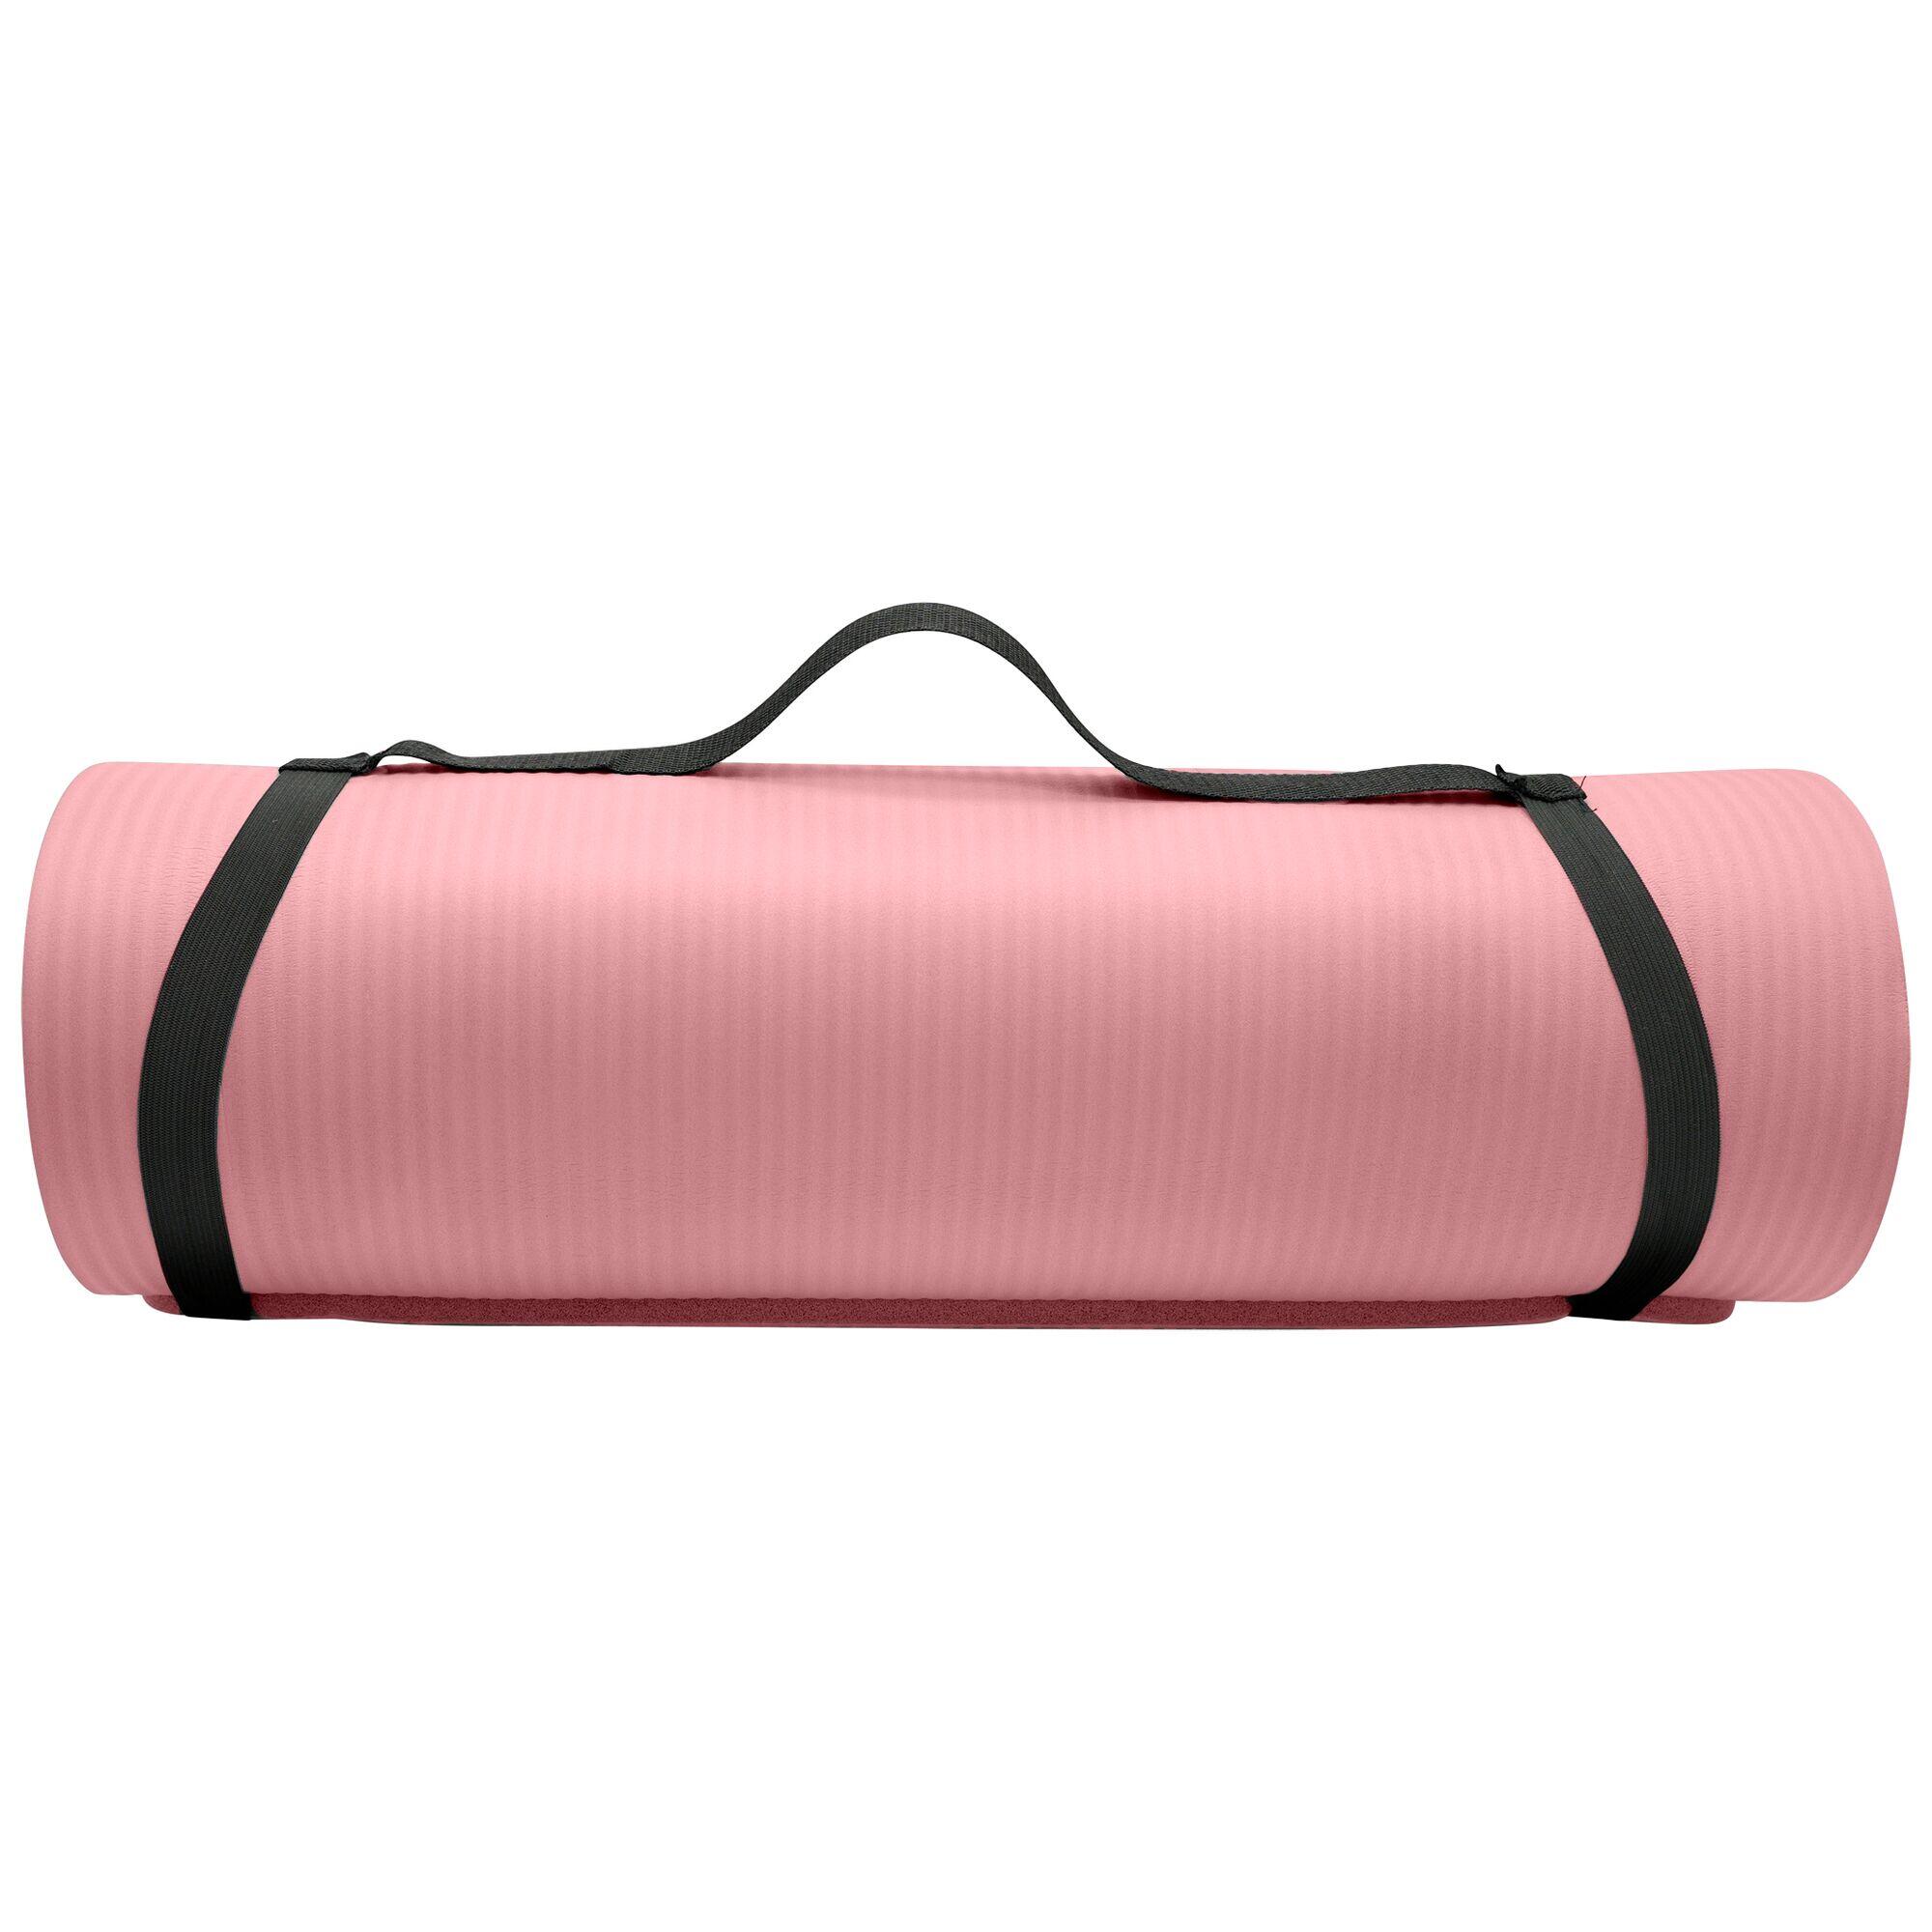 Adults' Home Fitness Yoga Mat - Pale Pink 2/4